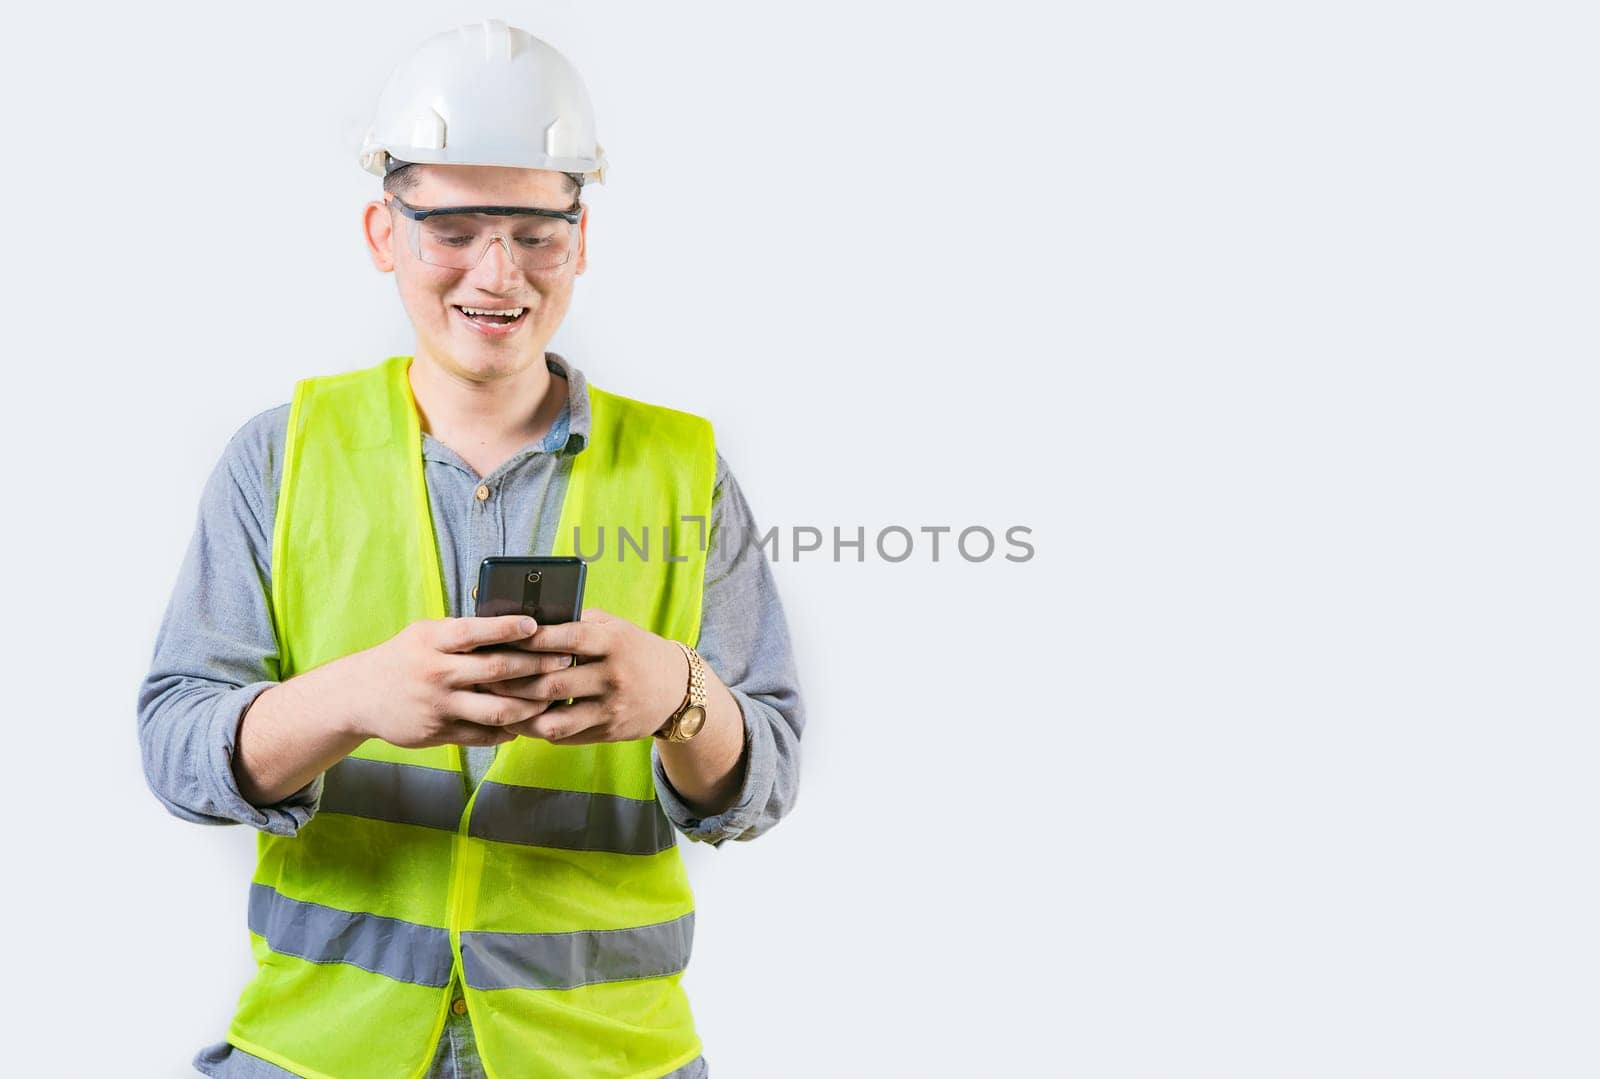 Handsome engineer holding phone isolated. Cheerful builder engineer texting phone on isolated background. Young engineer in vest and helmet using cell phone